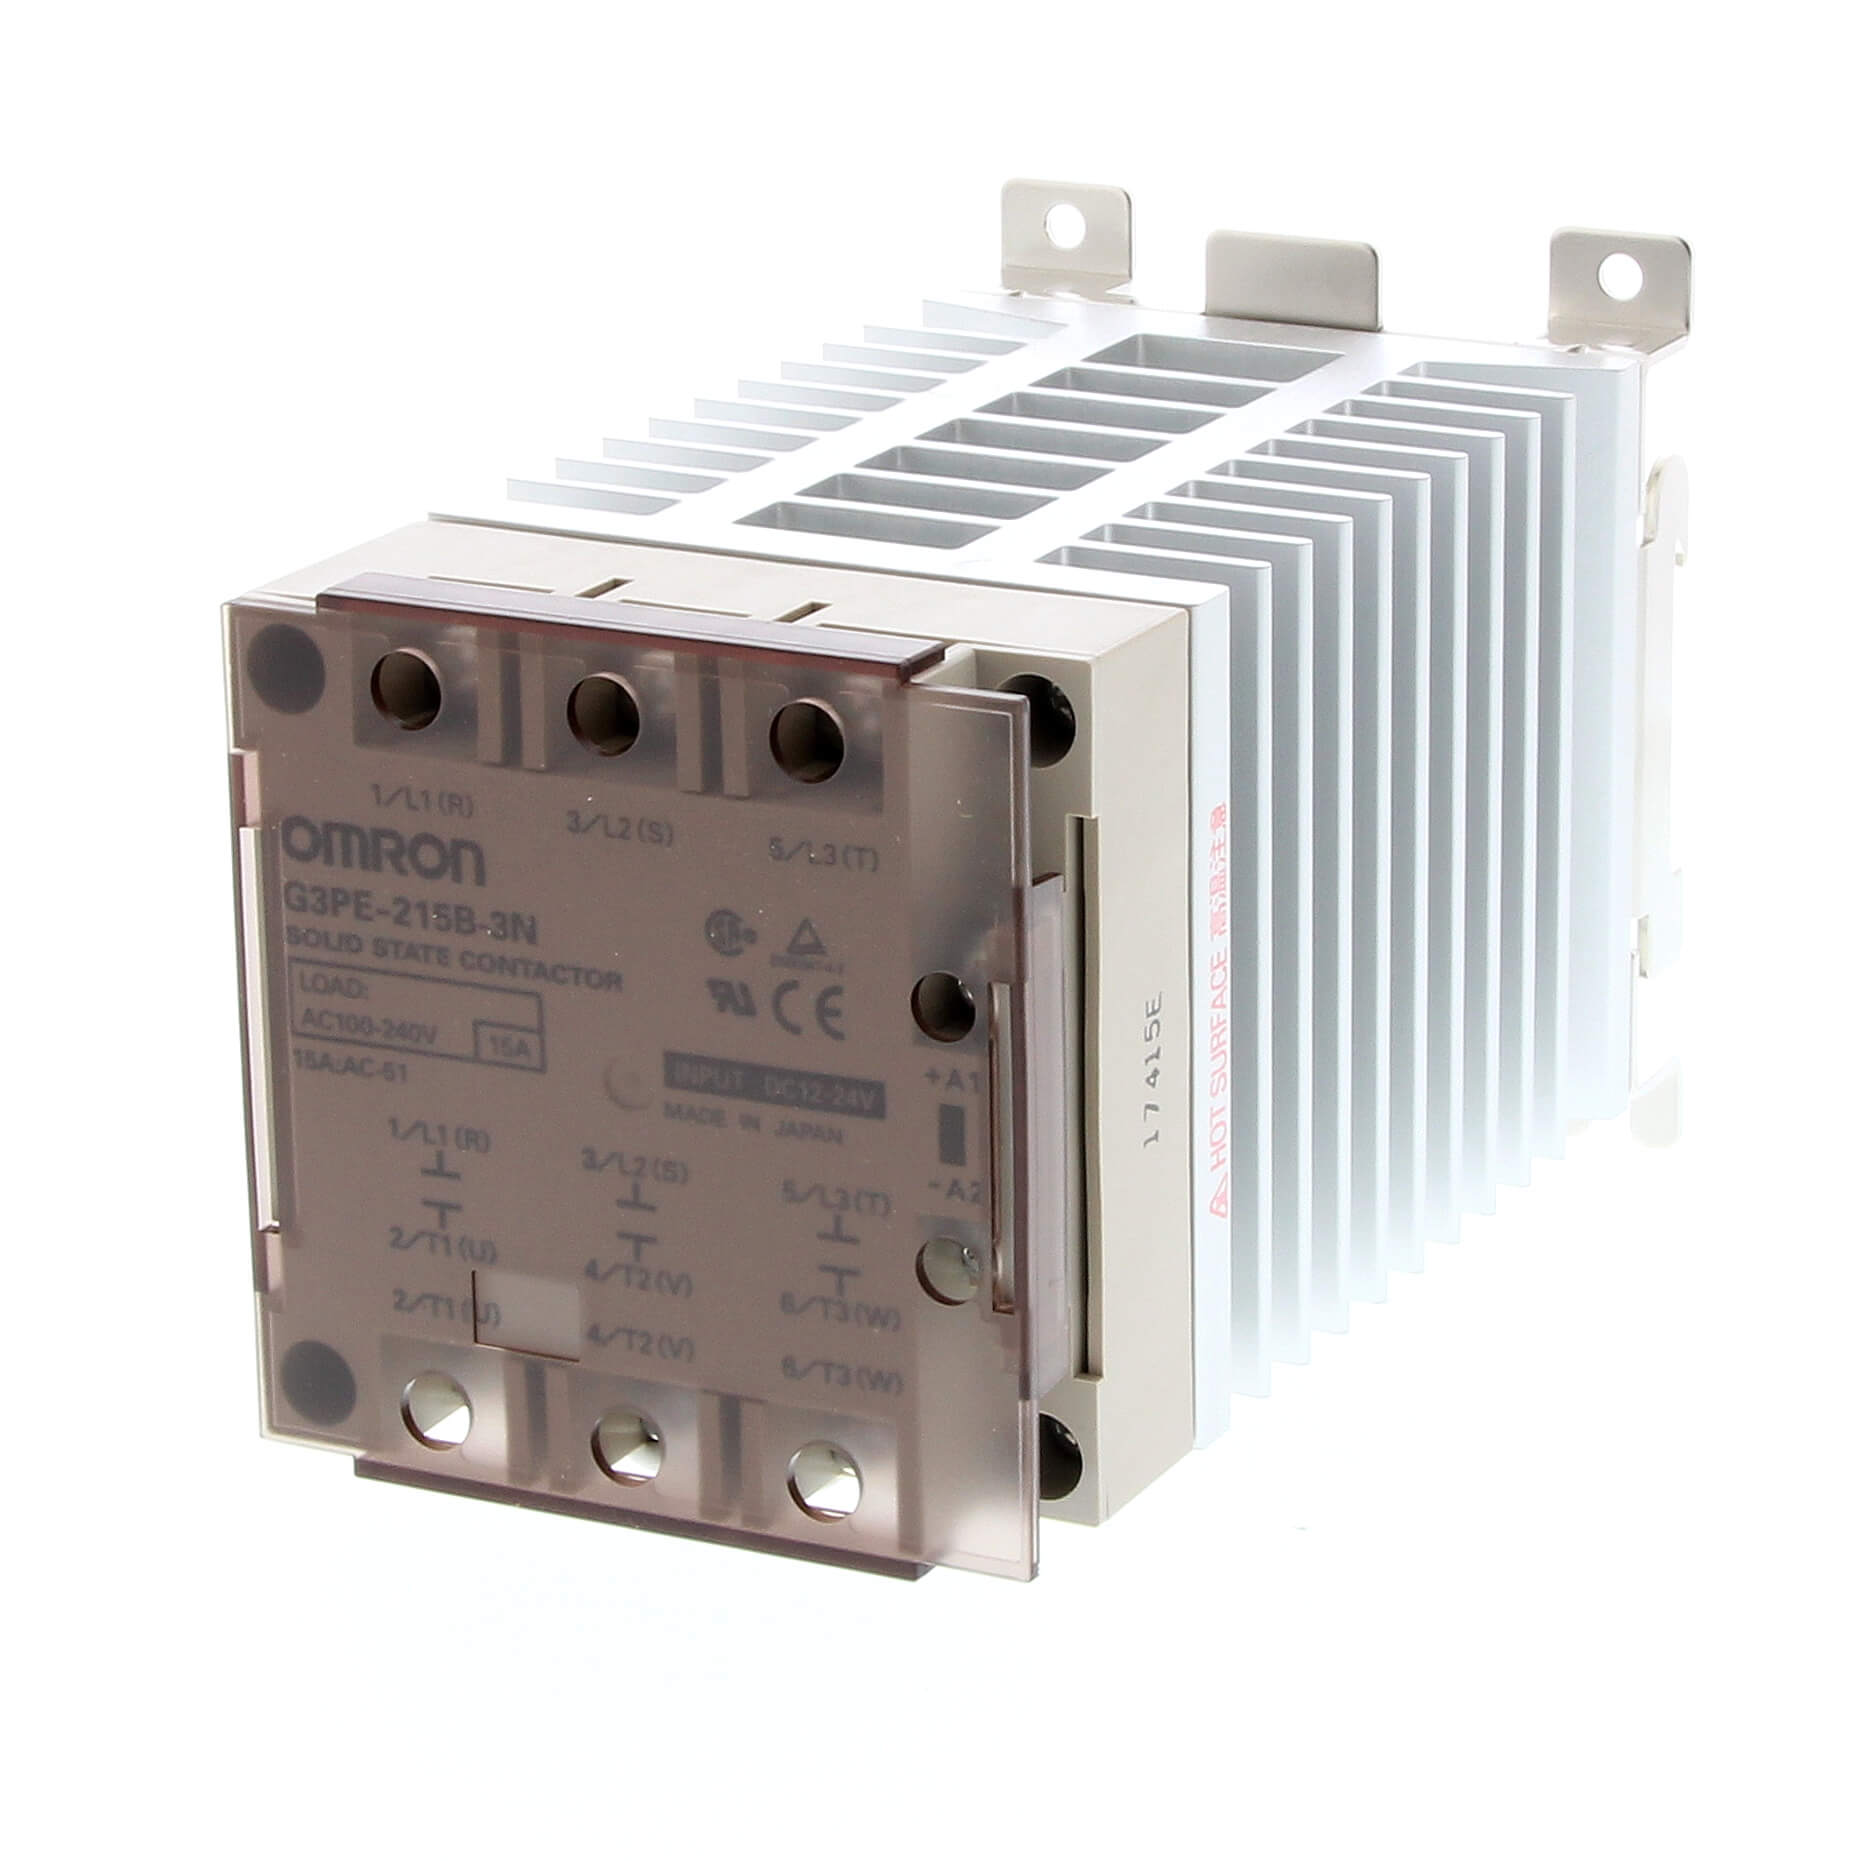 OMRON G3PE-215B-3N SOLID STATE CONTACTOR-